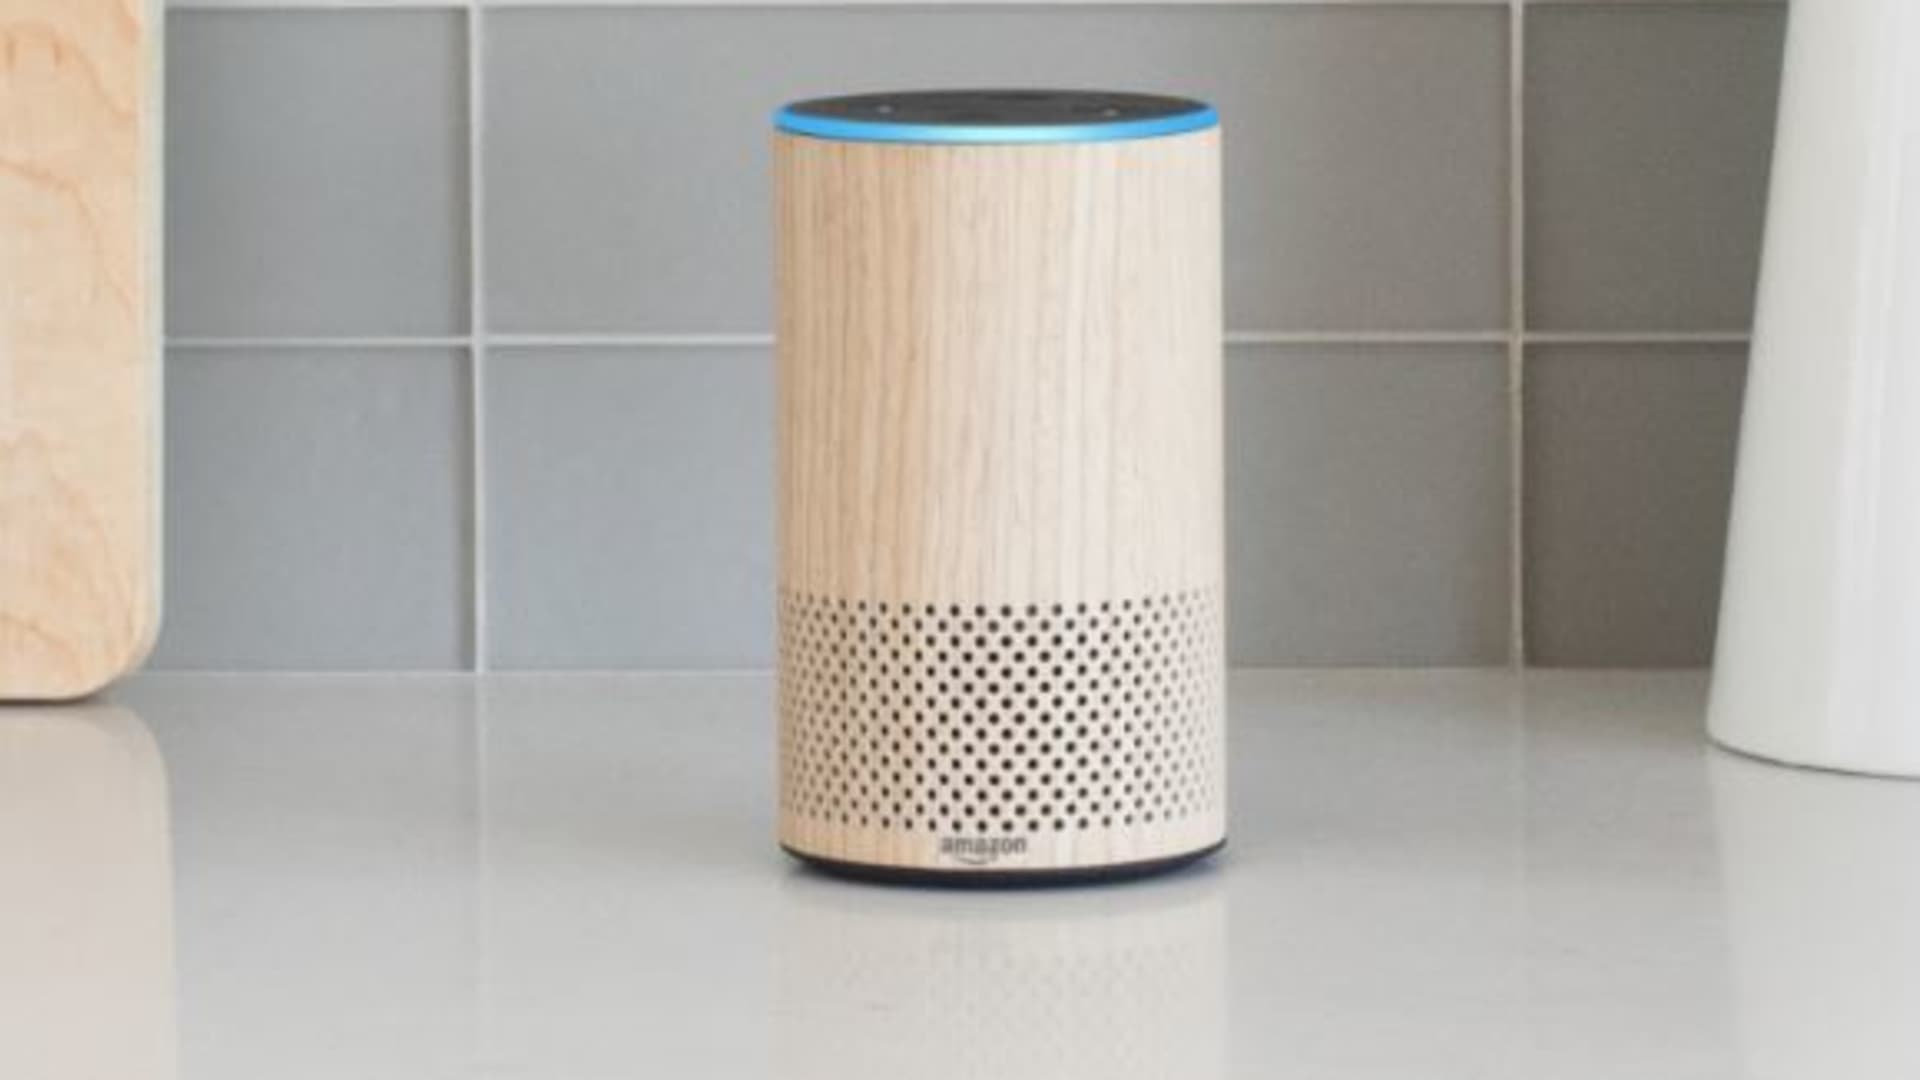 Echo and Alexa: 14 Ways to Control Your Home With Your Voice